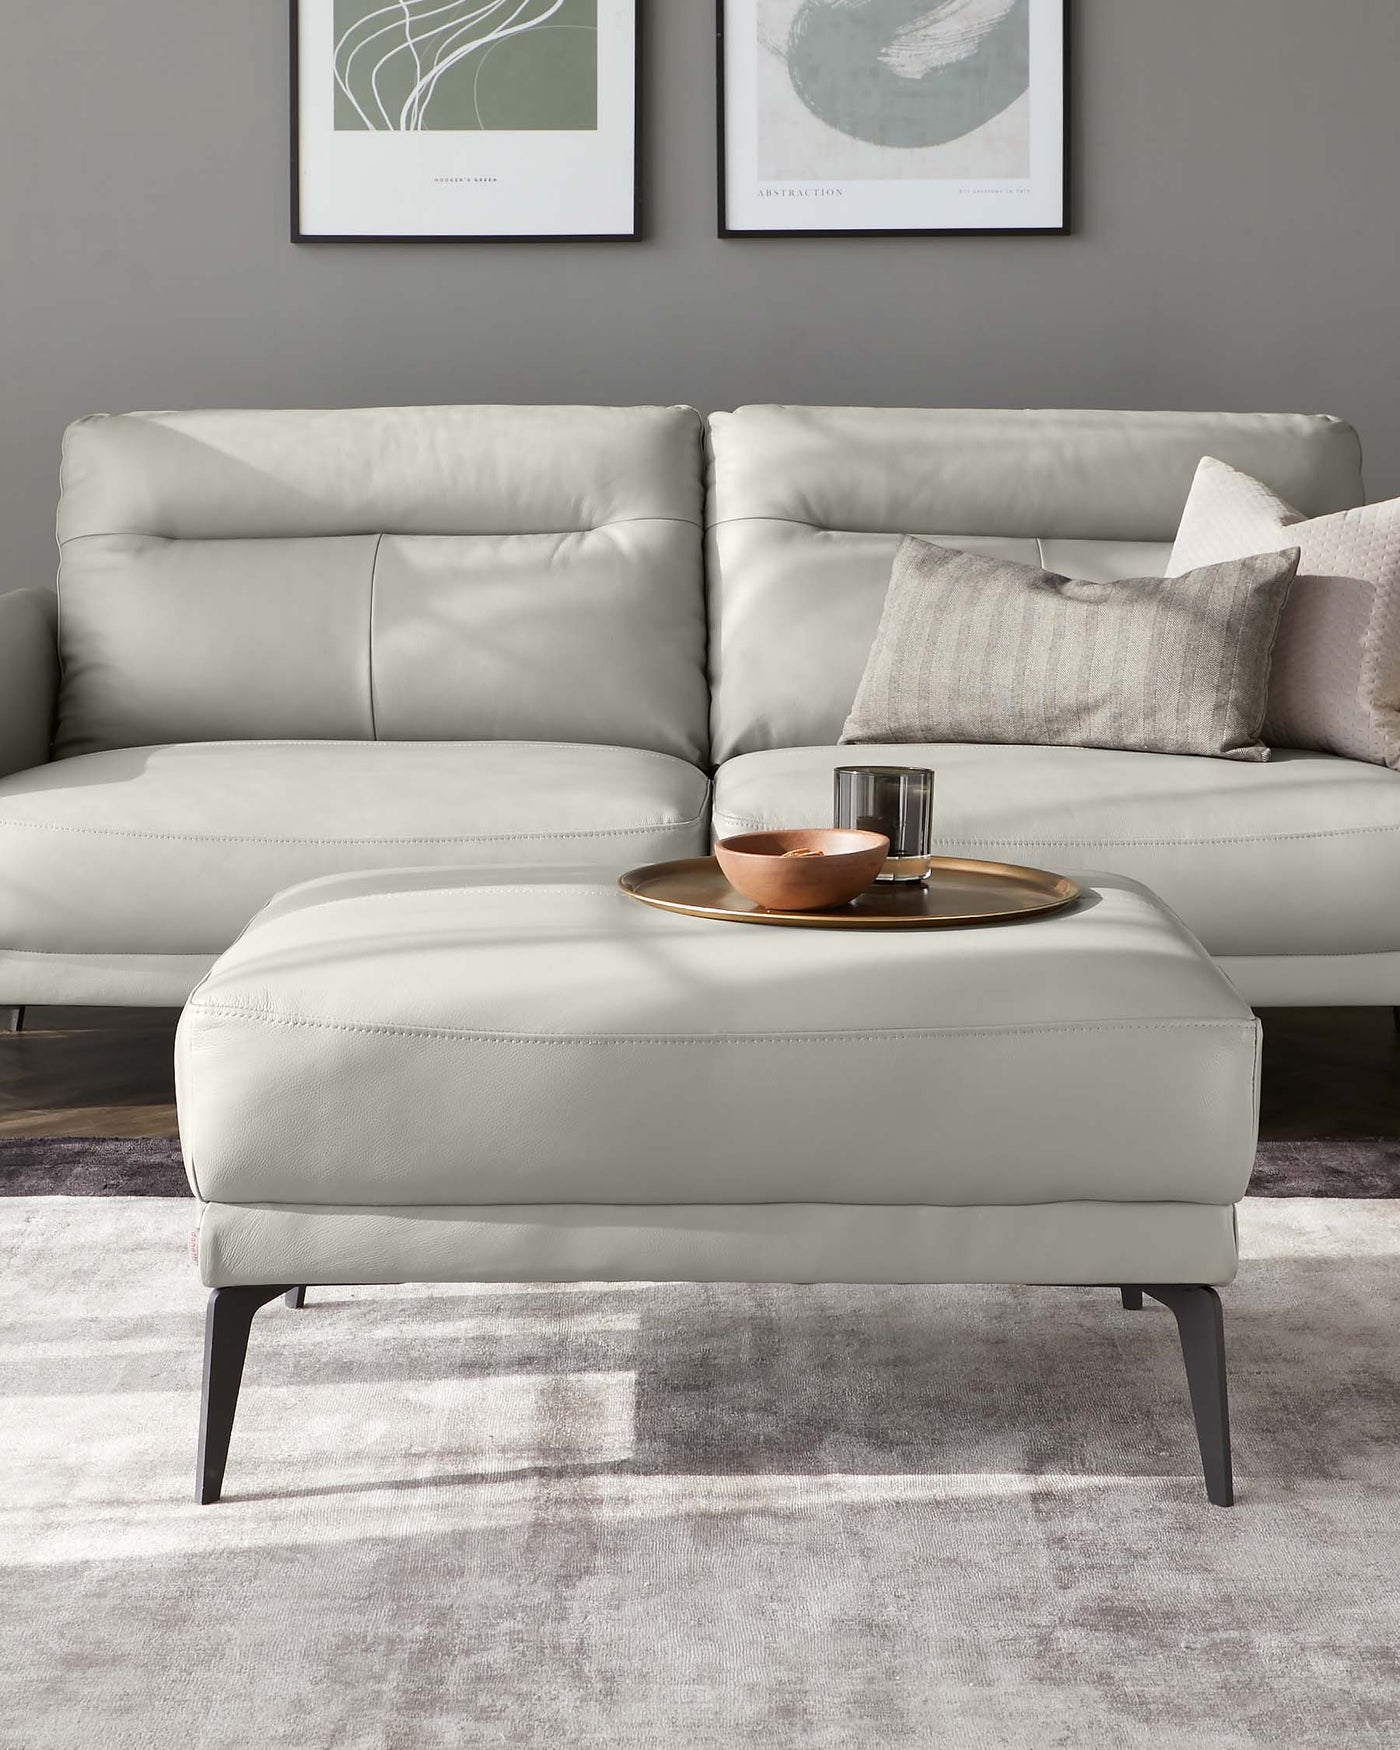 Modern light grey leather sectional sofa with plush cushions and a matching rectangular ottoman featuring a minimalist black metal leg design. The ottoman is accessorized with a round tray holding a decorative copper bowl and a clear glass. The sofa is set against a grey wall with abstract framed art, placed on a gradient grey area rug.